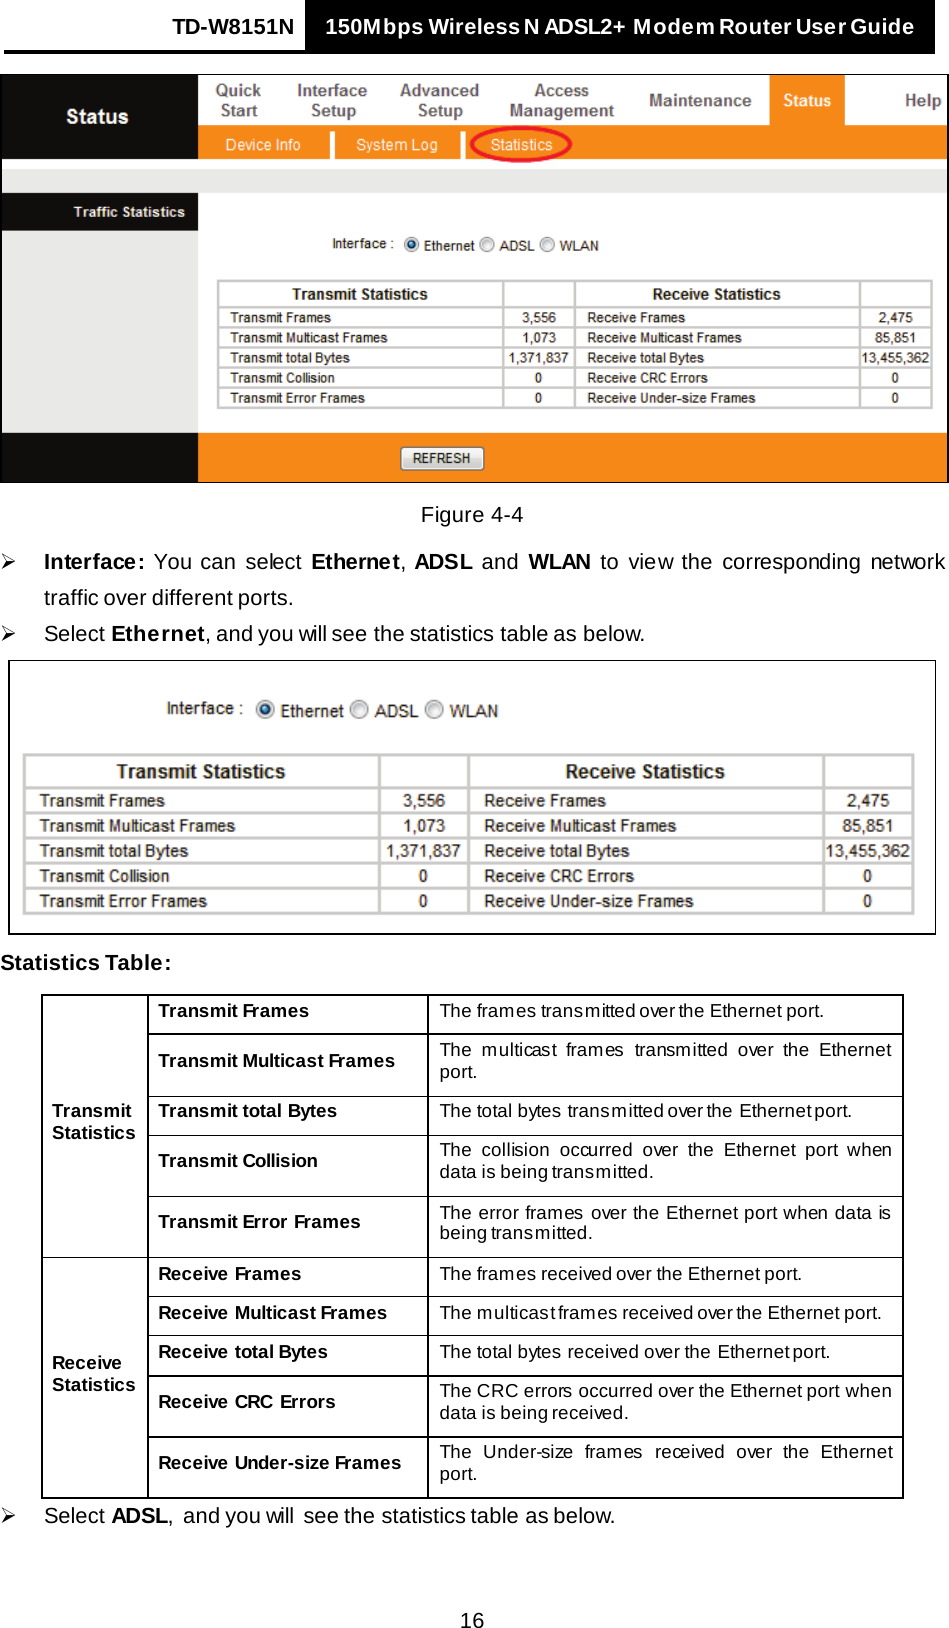 TD-W8151N 150Mbps Wireless N ADSL2+ Modem Router User Guide   16  Figure 4-4  Interface:  You can select Ethernet, ADSL and WLAN to view the corresponding network traffic over different ports.    Select Ethernet, and you will see the statistics table as below.  Statistics Table: Transmit Statistics Transmit Frames The frames transmitted over the Ethernet port. Transmit Multicast Frames The multicast frames transmitted over the Ethernet port. Transmit total Bytes The total bytes transmitted over the  Ethernet port. Transmit Collision The collision occurred over the Ethernet port when data is being transmitted. Transmit Error Frames The error frames over the Ethernet port when data is being transmitted.   Receive Statistics Receive Frames The frames received over the Ethernet port. Receive Multicast Frames The multicast frames received over the Ethernet port. Receive total Bytes The total bytes received over the Ethernet port. Receive CRC Errors The CRC errors occurred over the Ethernet port when data is being received. Receive Under-size Frames The Under-size frames received over the Ethernet port.  Select ADSL,  and you will see the statistics table as below. 